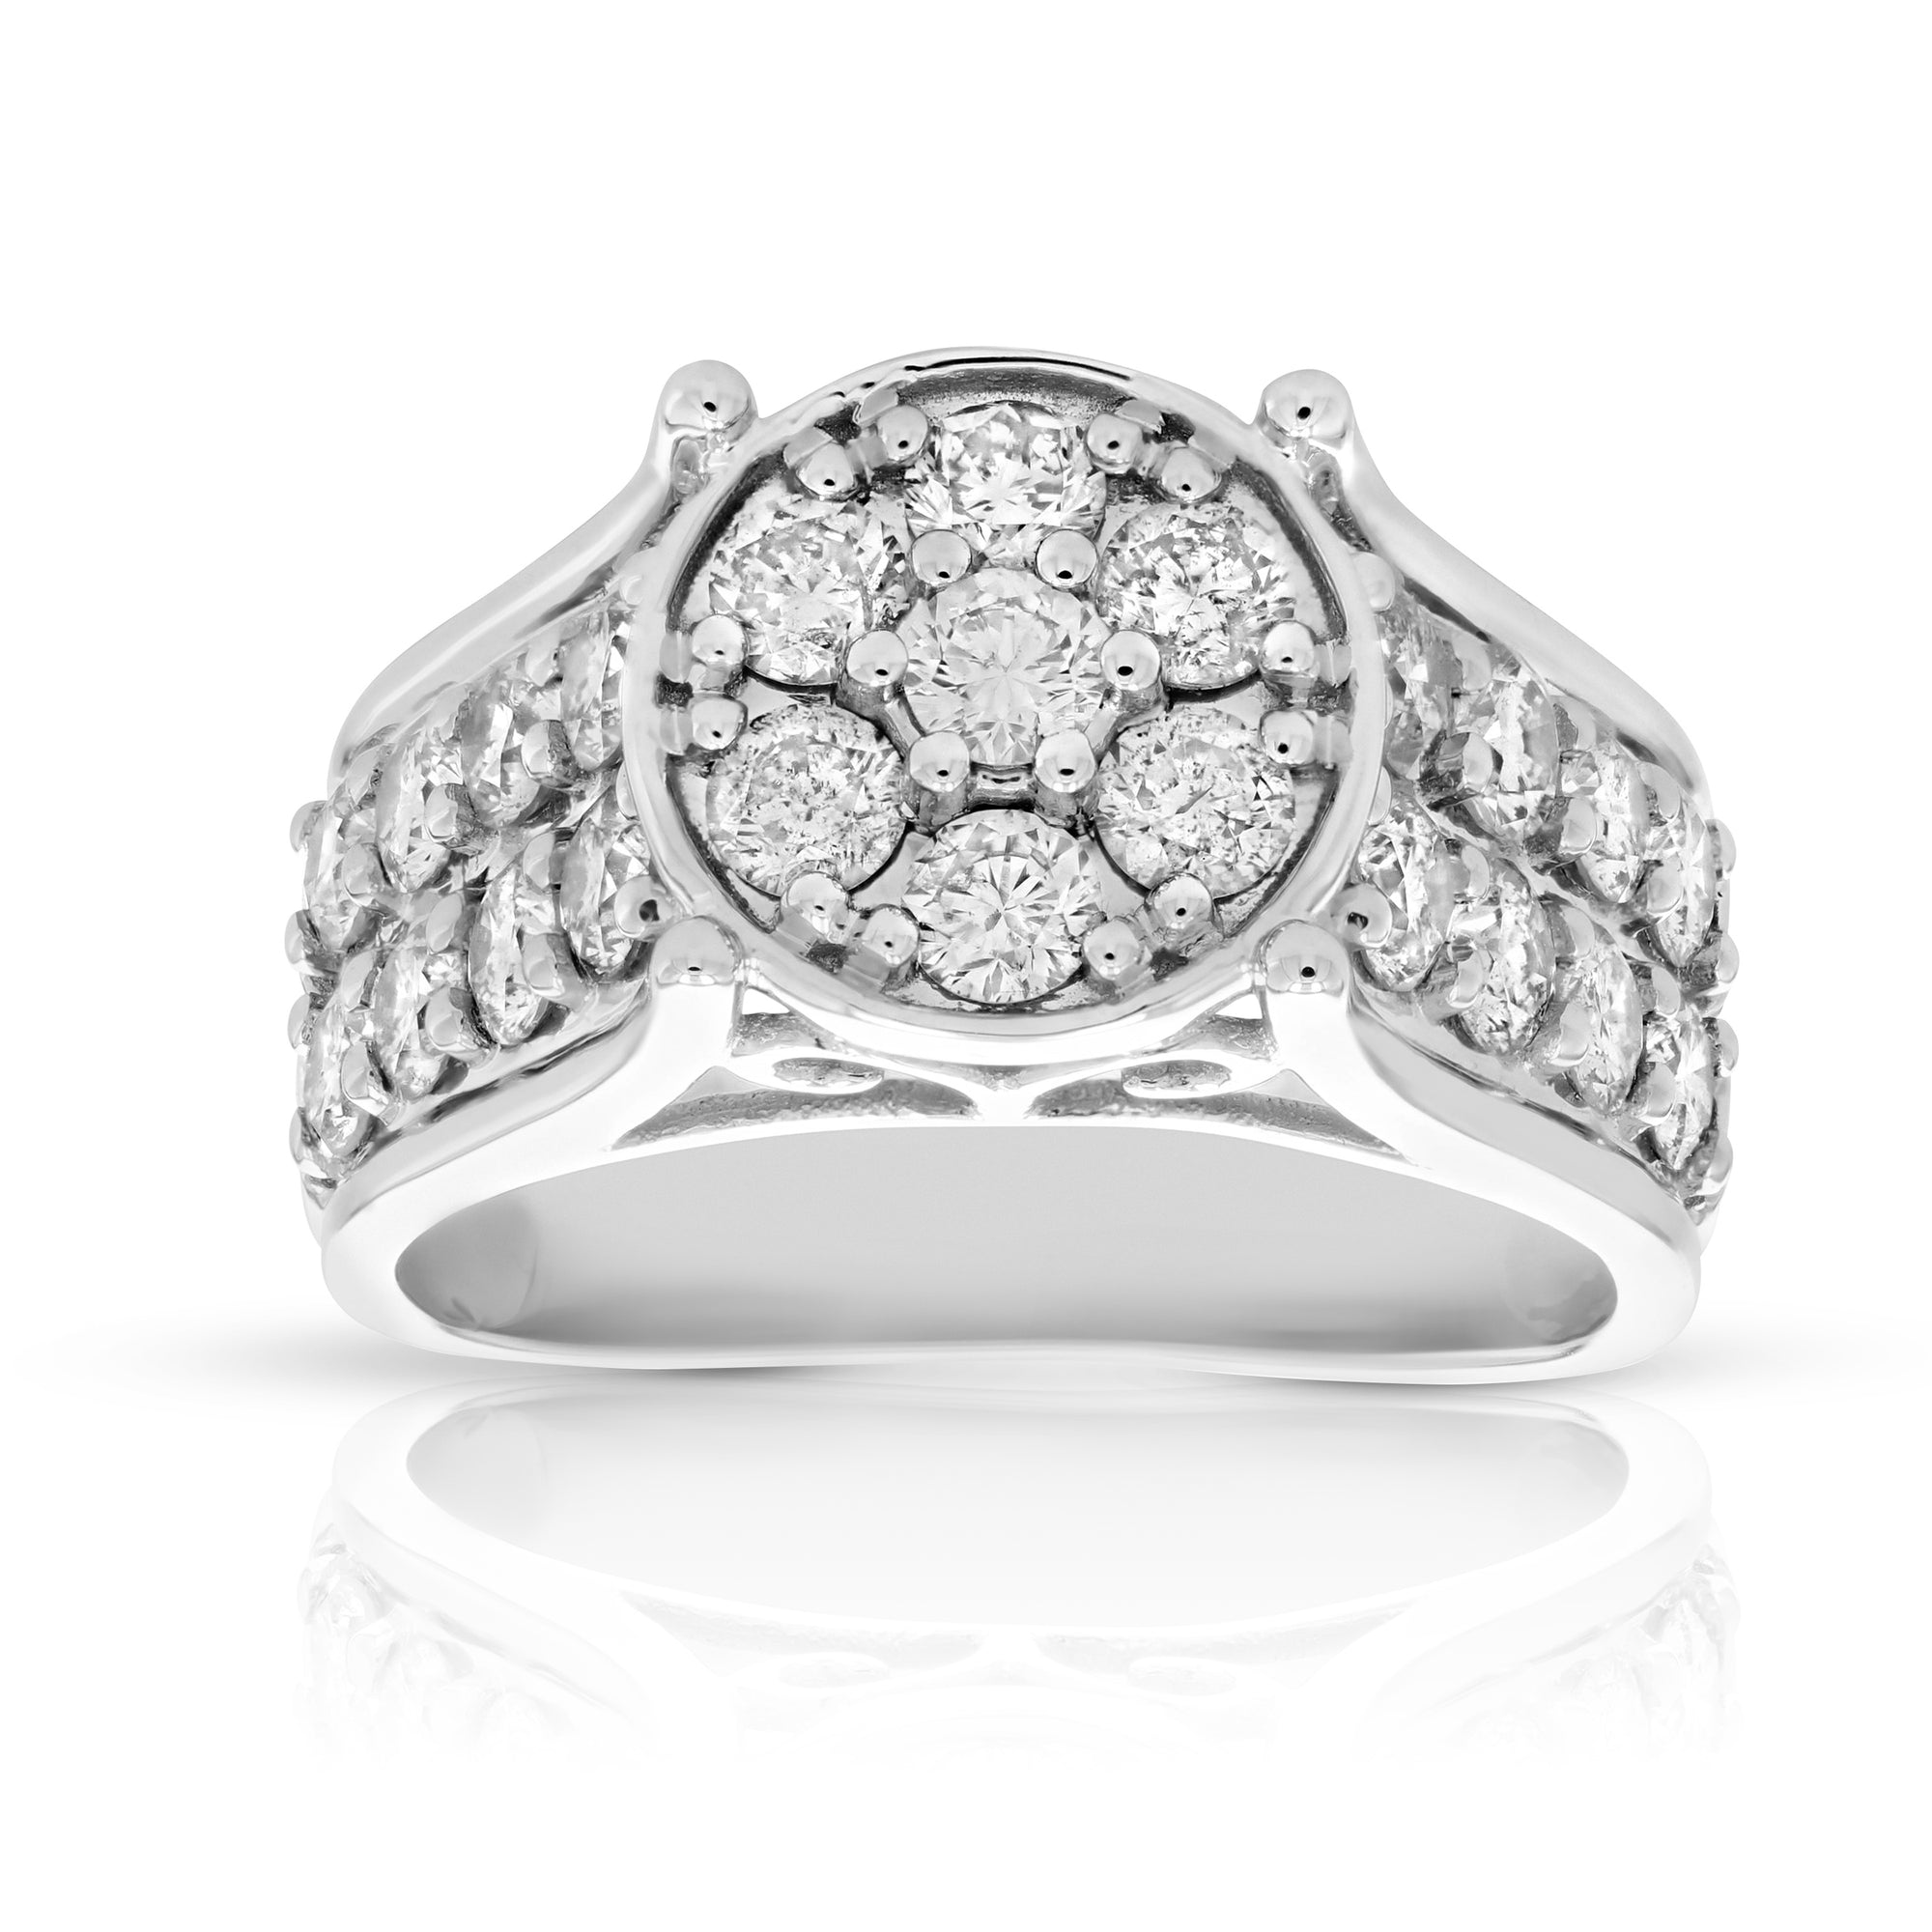 2 cttw Diamond Engagement Ring Round Cluster Composite 14K White Gold Bridal